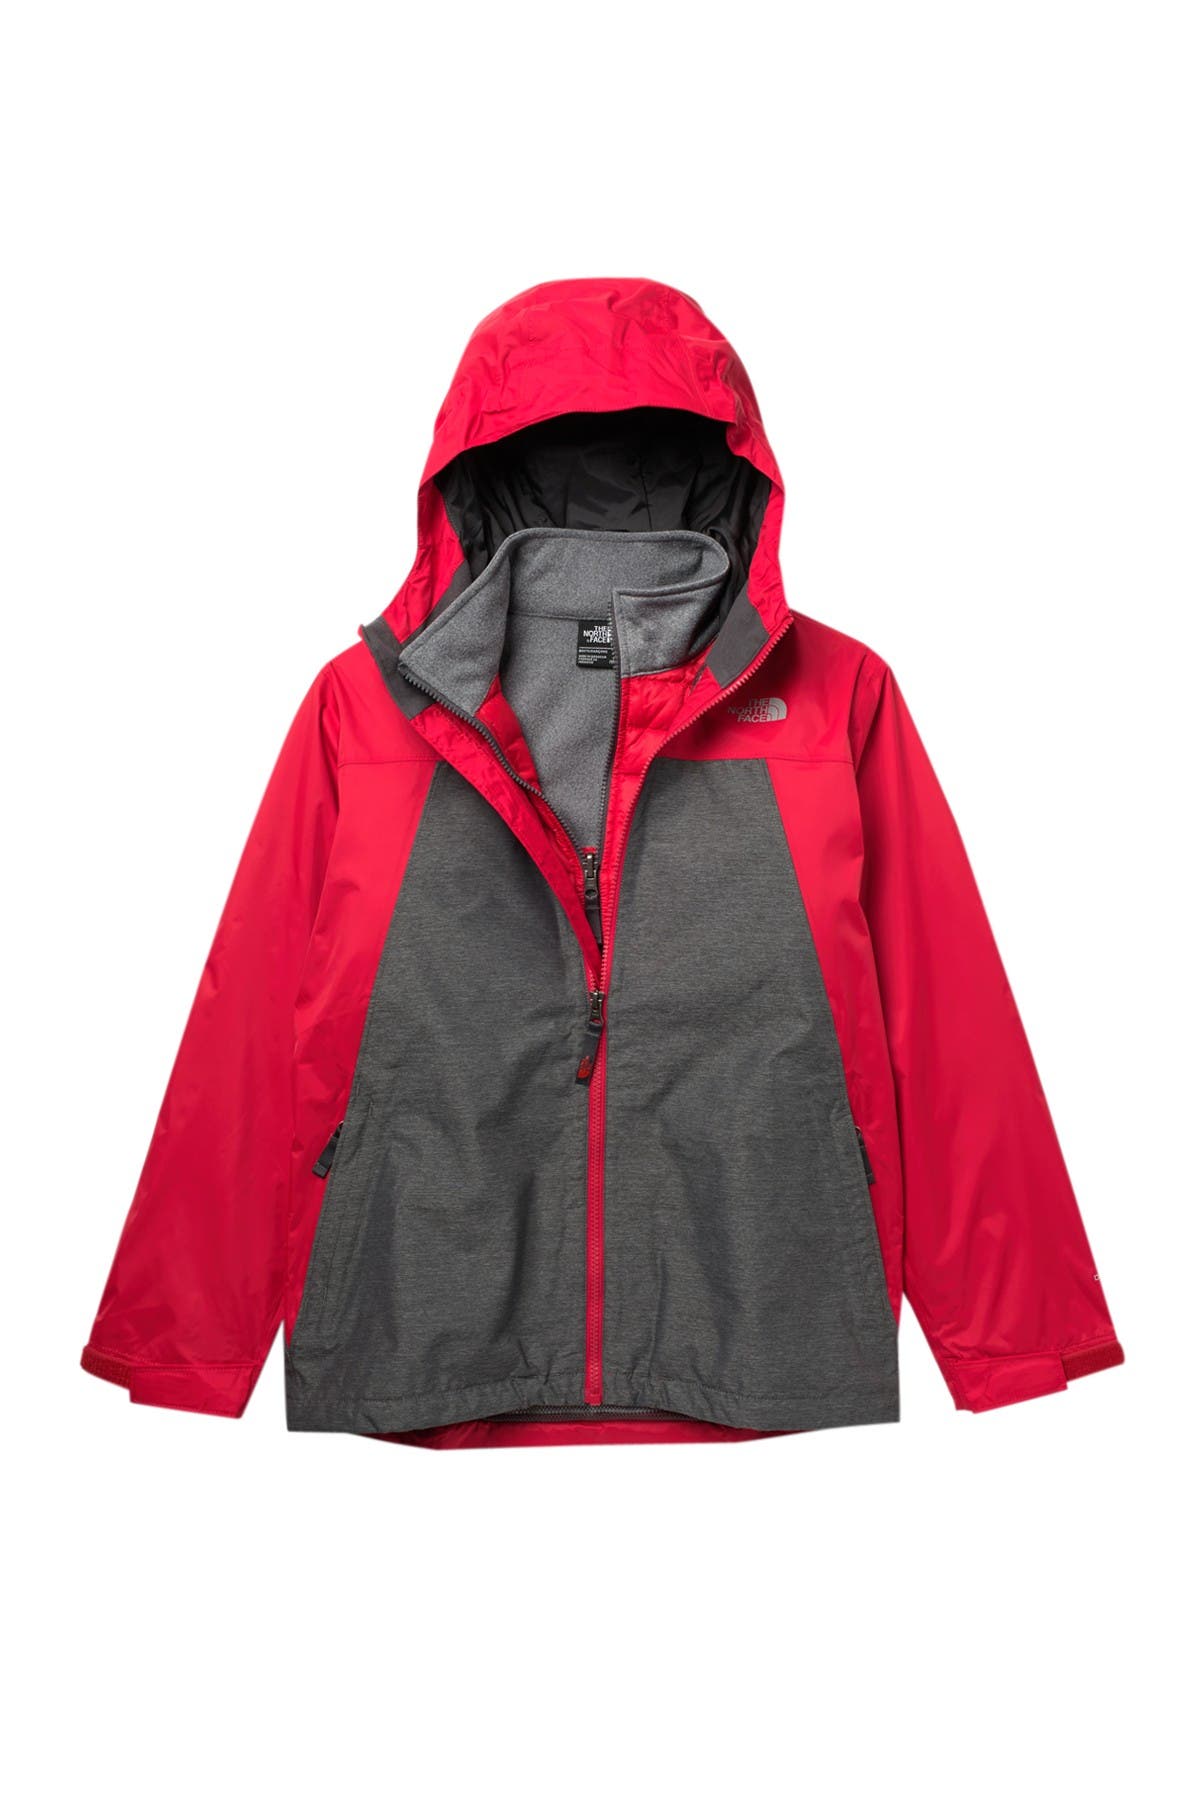 north face thermoball waterproof